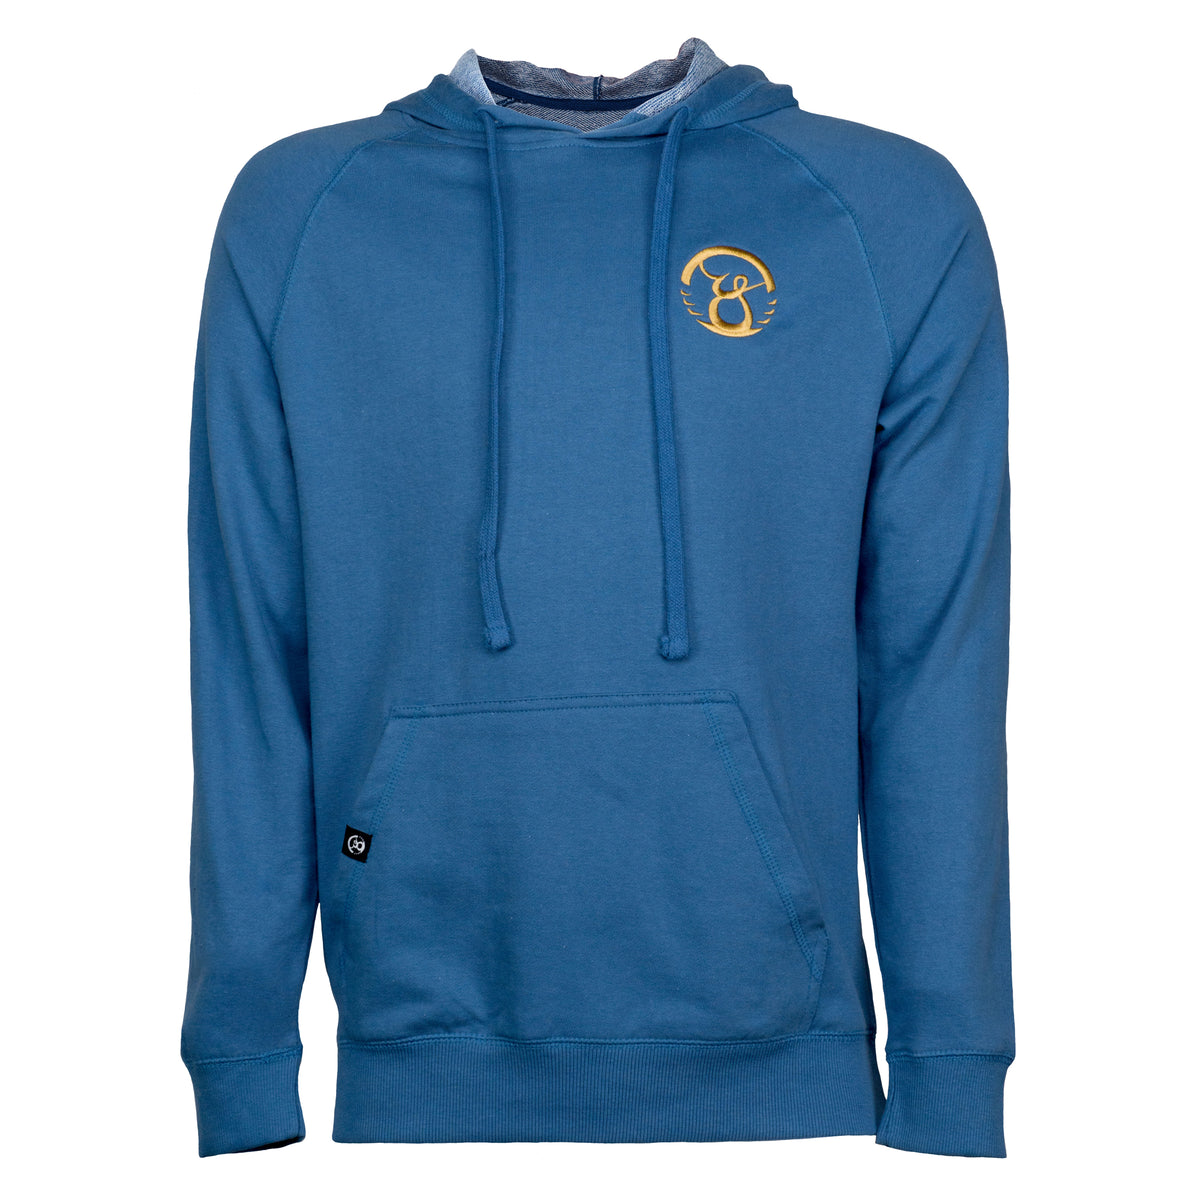 OY Classic Boujee Blue Hoodie - OY BRAND CLOTHING